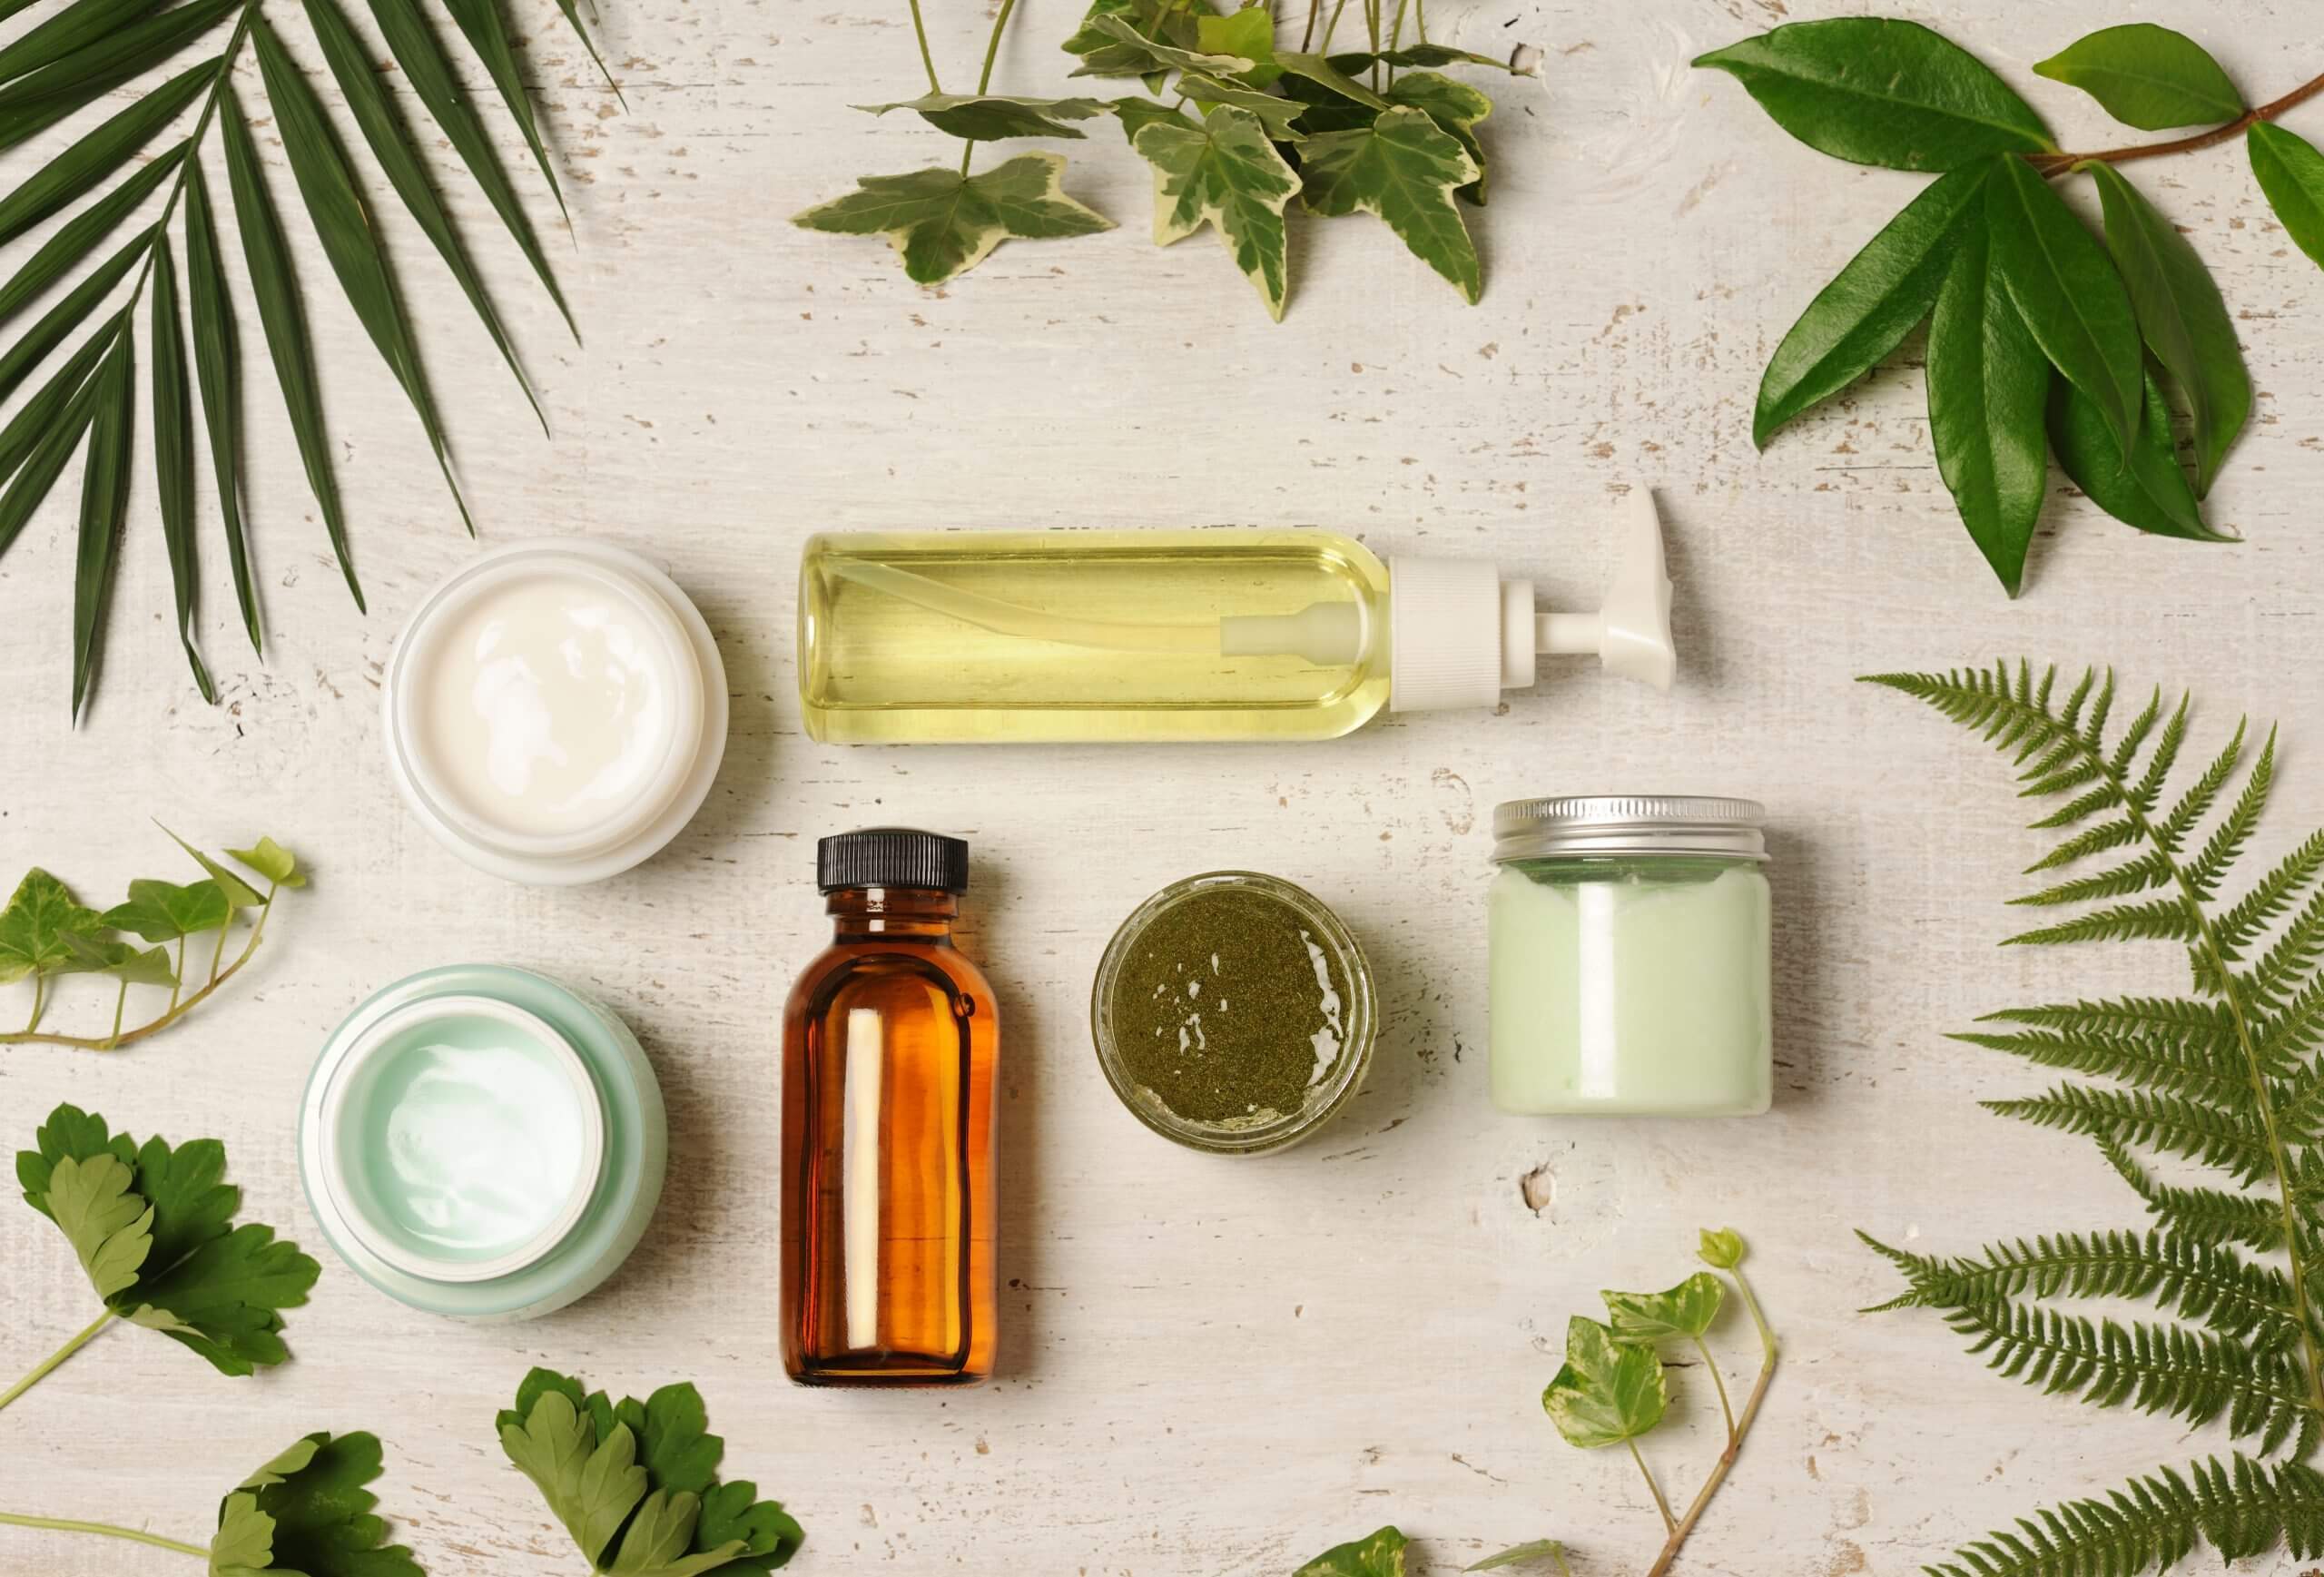 How the Ingredients in Personal-Care Products Can Affect Your Health